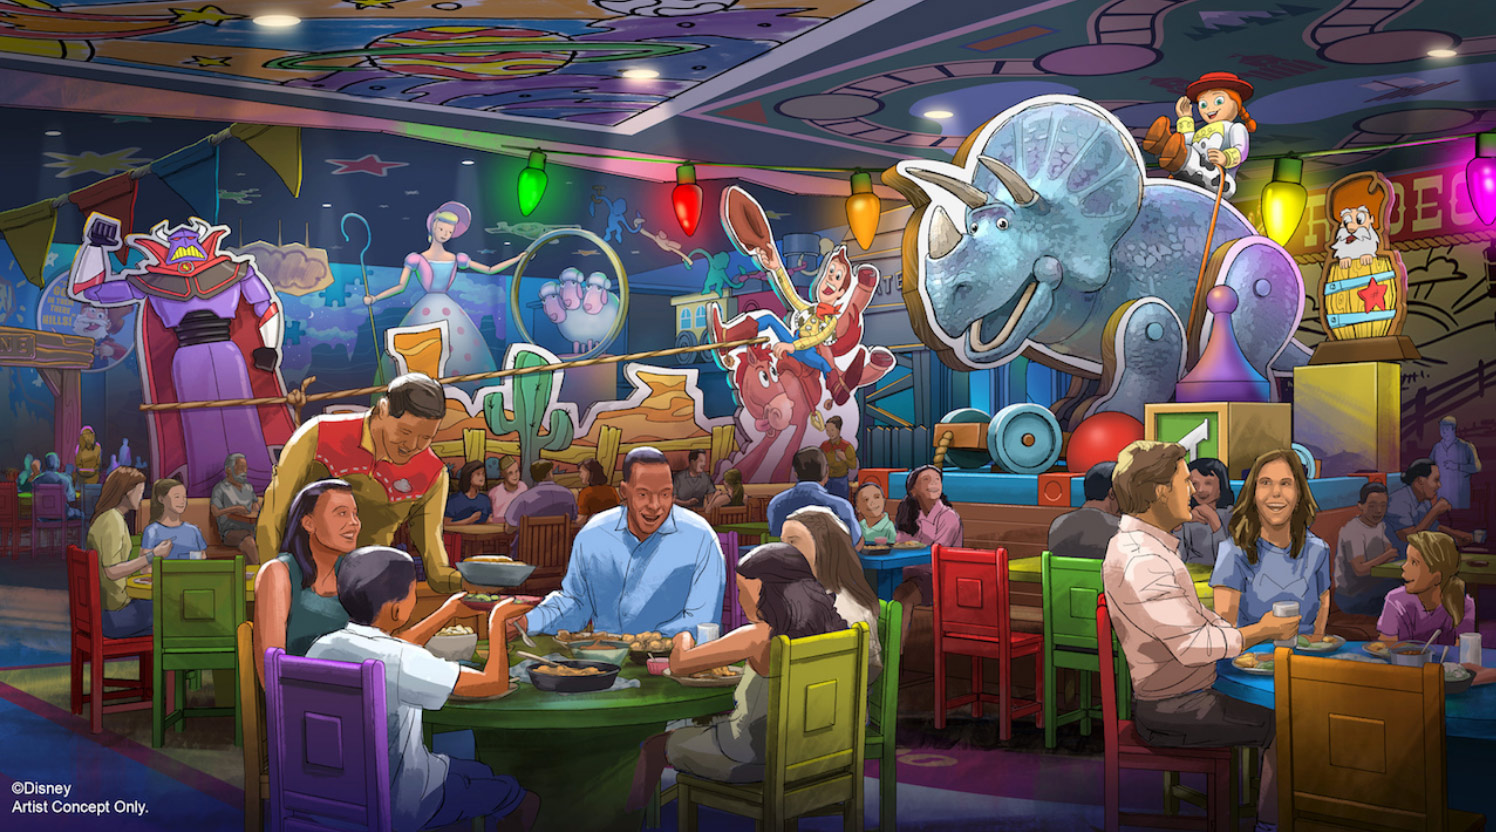 Artist concept of Roundup Rodeo BBQ Restaurant interior featuring the characters of Toy Story and guests sitting at restaurant tables for Toy Story Land inside of Disney's Hollywood Studios®, Lake Buena Vista, Florida.